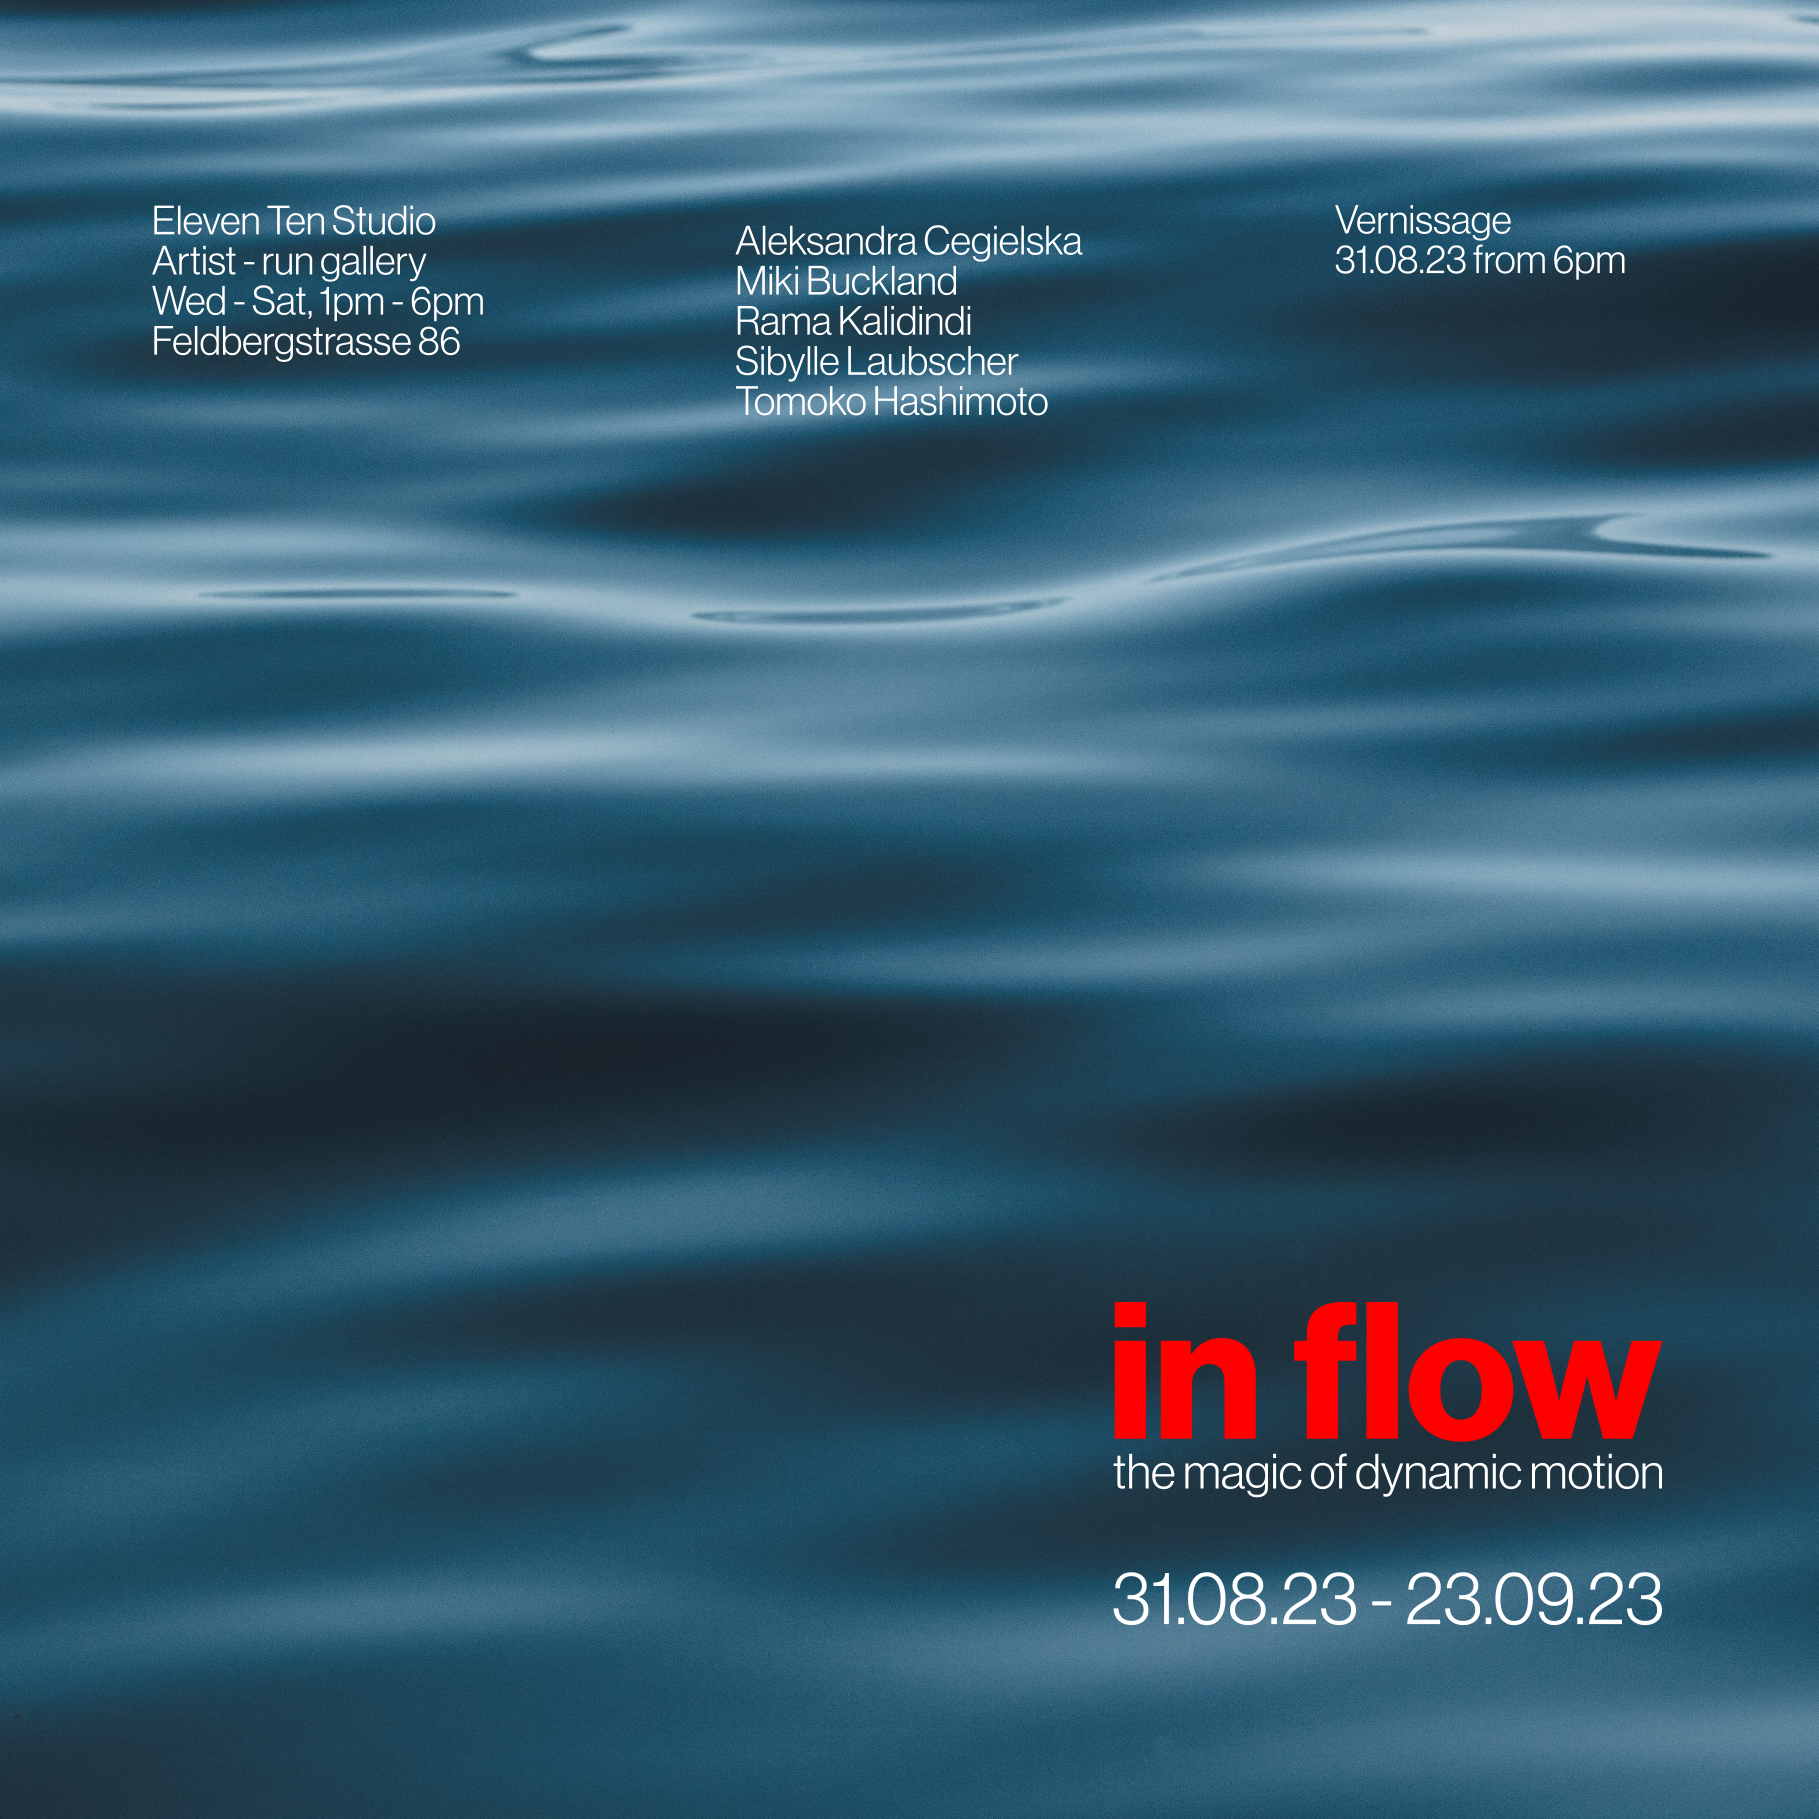 Artist Talk 21 Sept 23 | in flow - the magic of dynamic motion